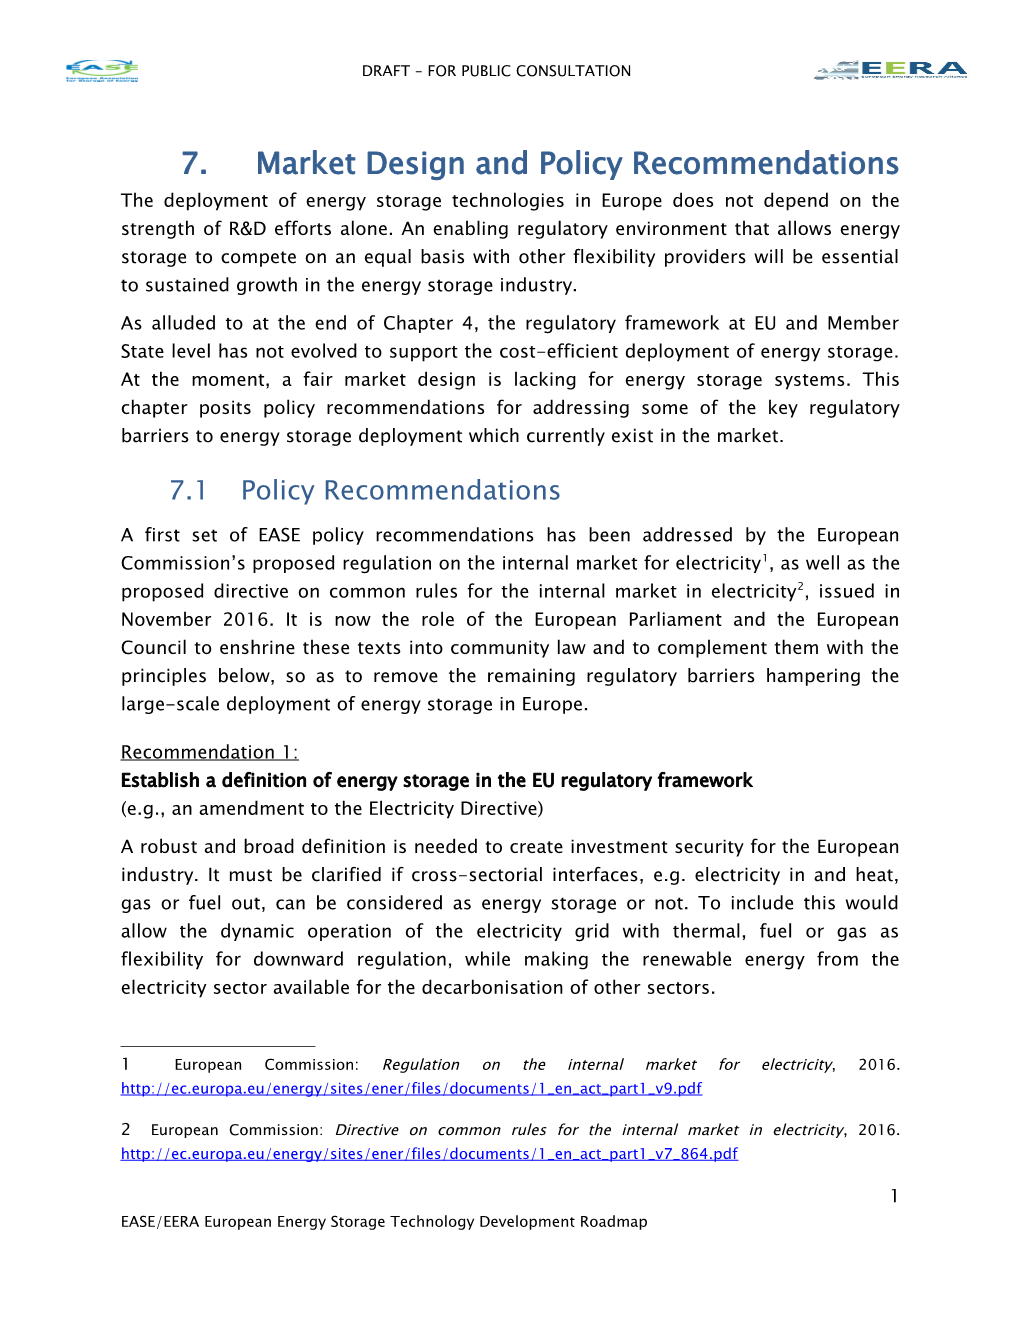 7. Market Design and Policy Recommendations